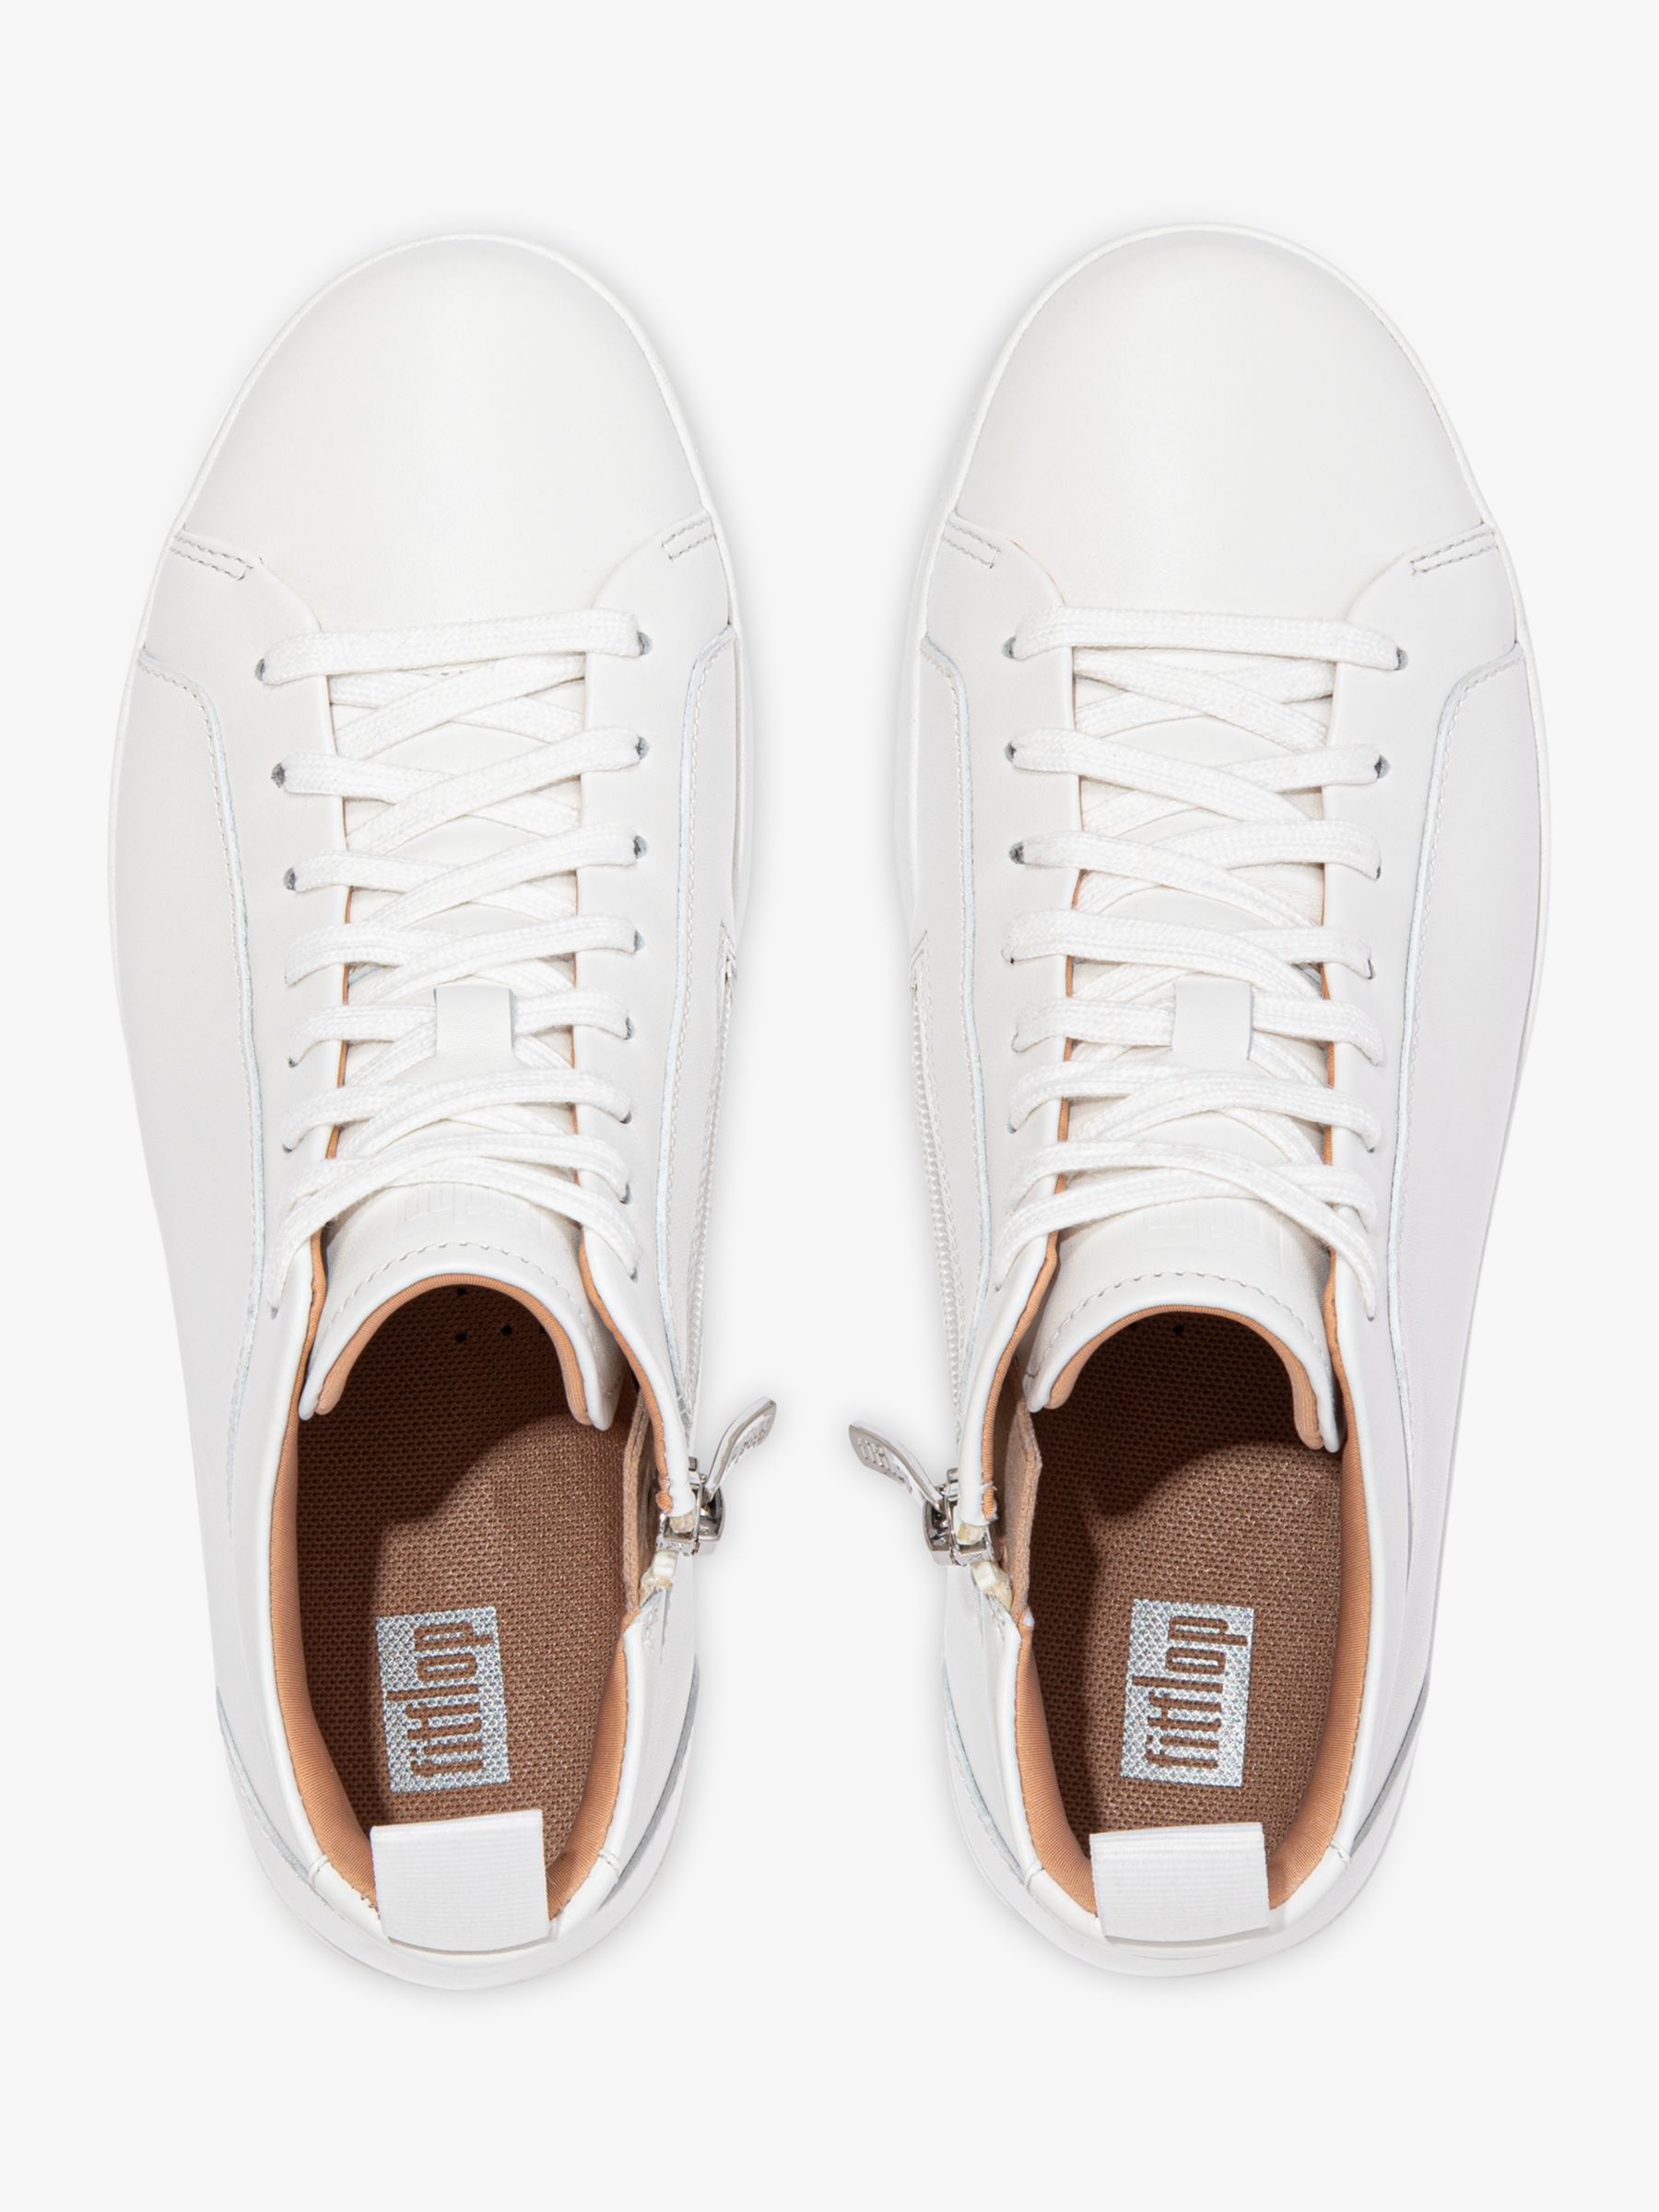 FitFlop Rally Leather Hi-Top Trainers, Urban White at John Lewis & Partners